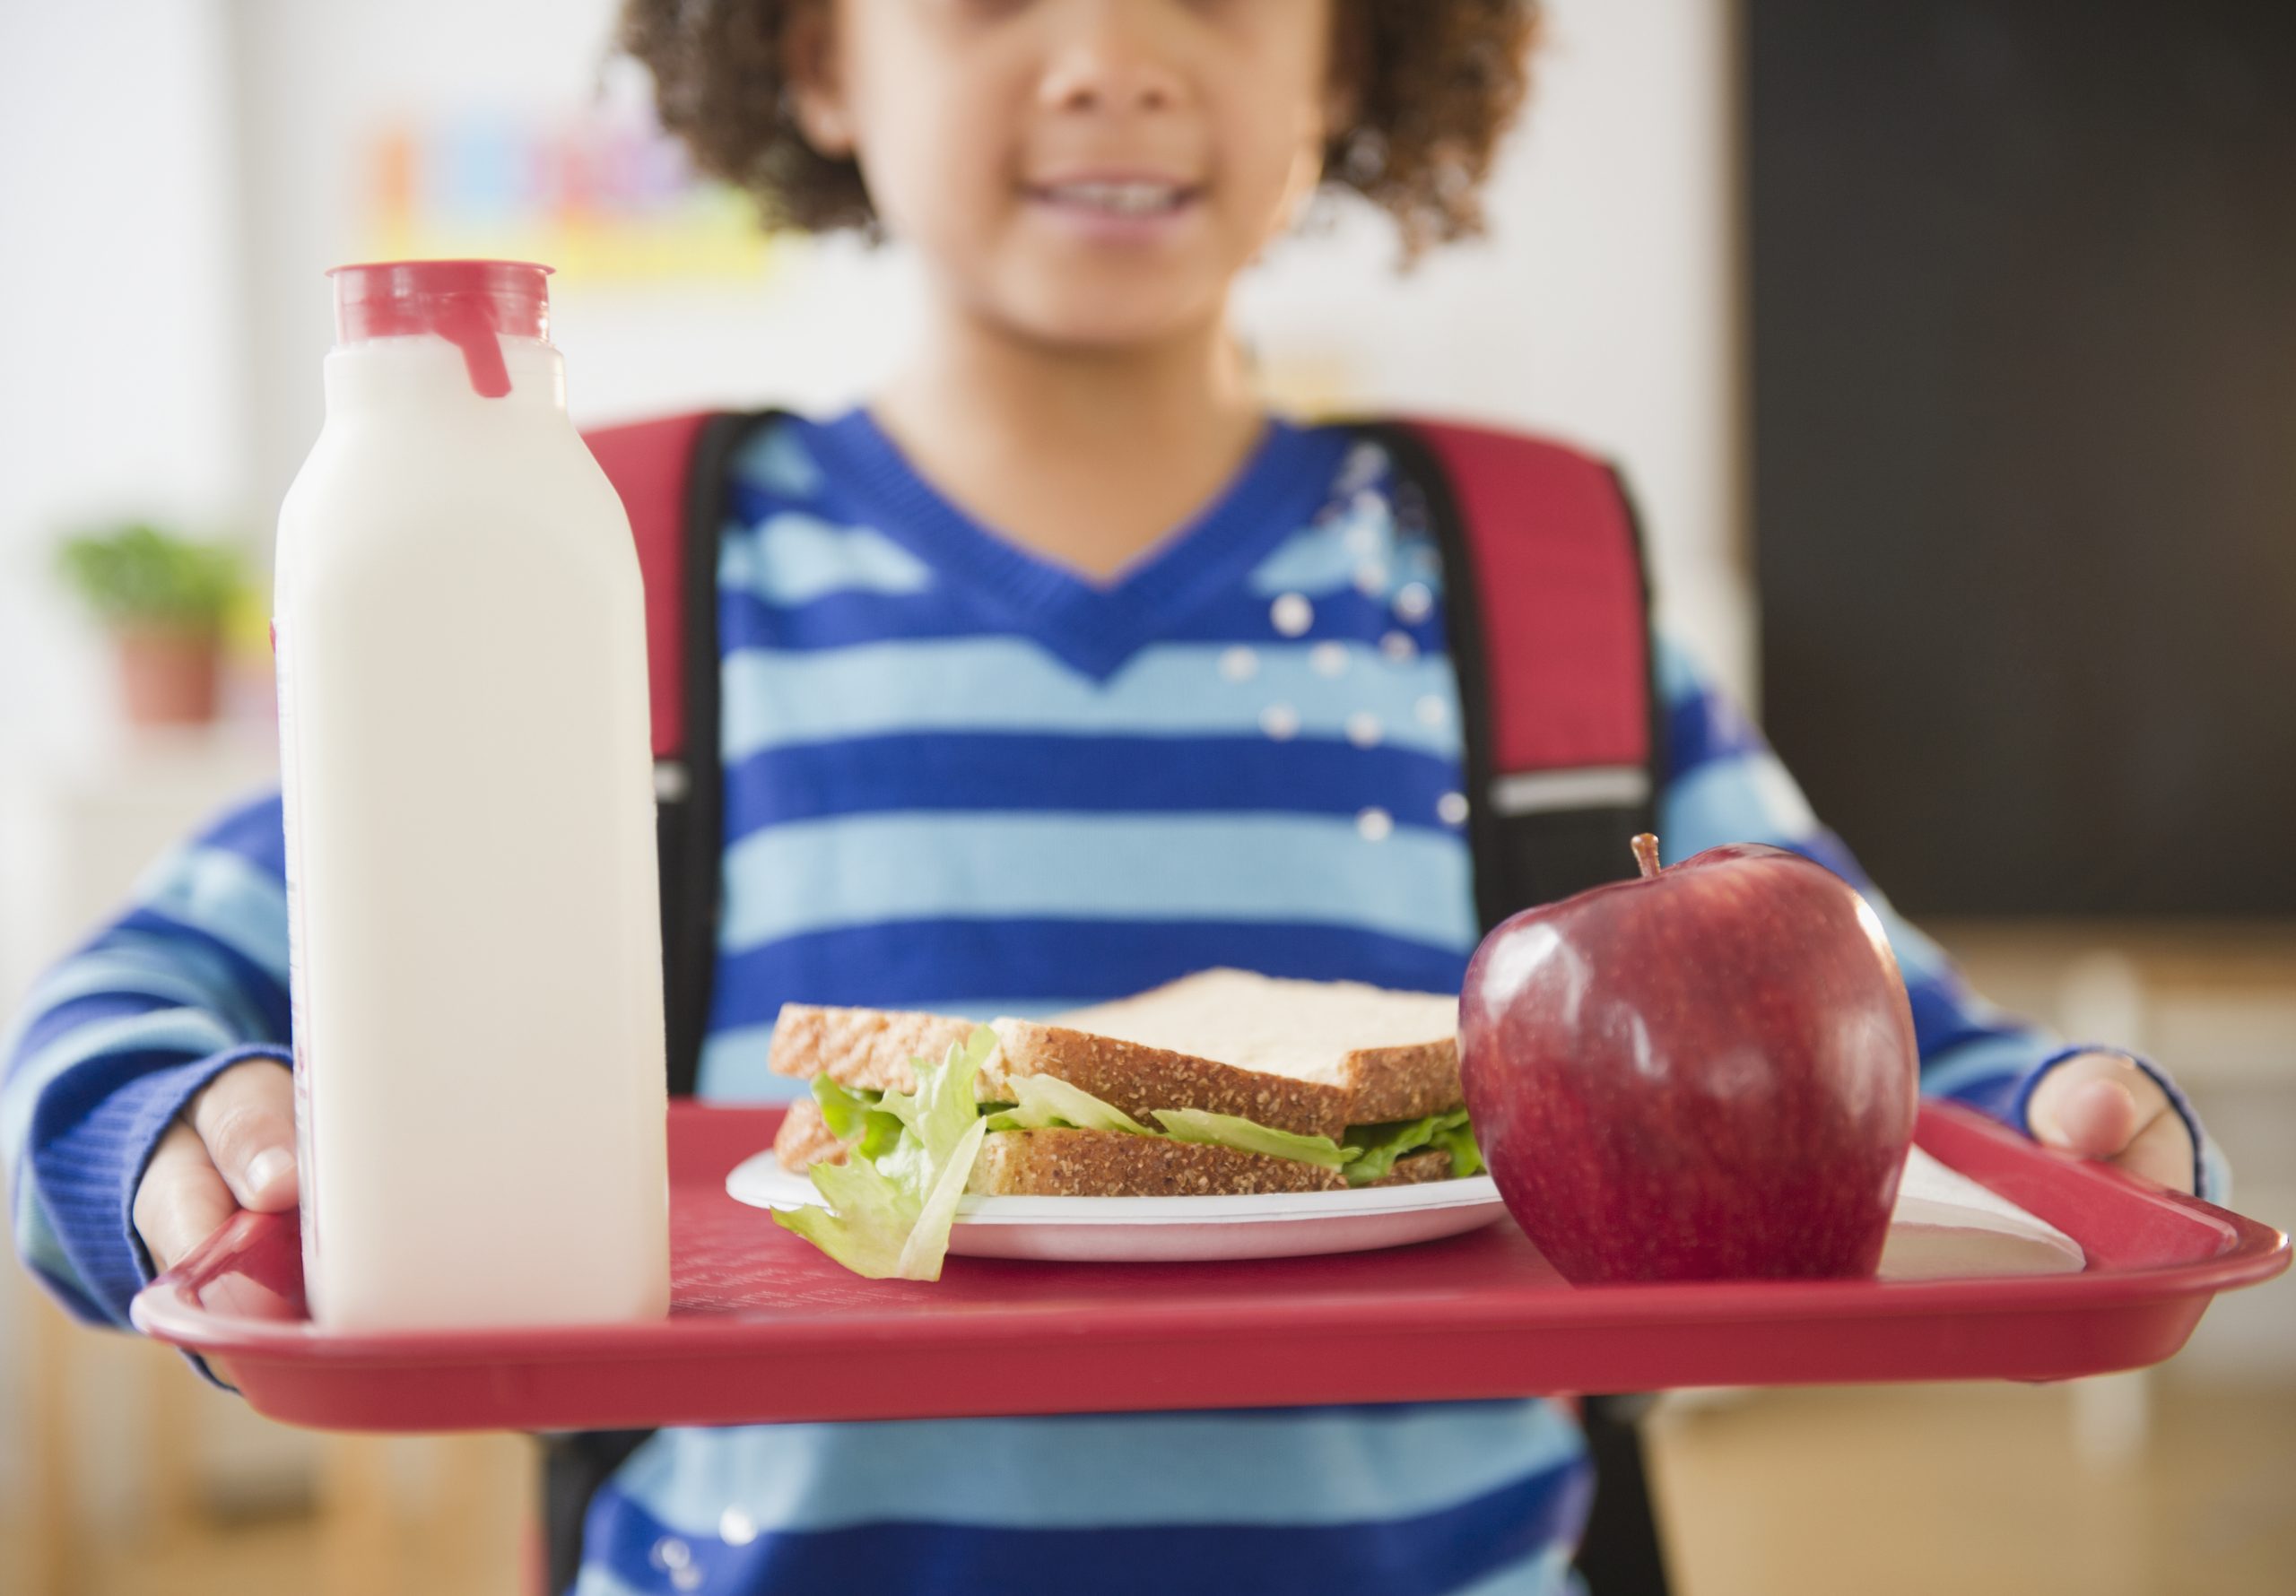 A girl with a backpack on her back holds a tray in front of her with a sandwich, apple and bottle of milk